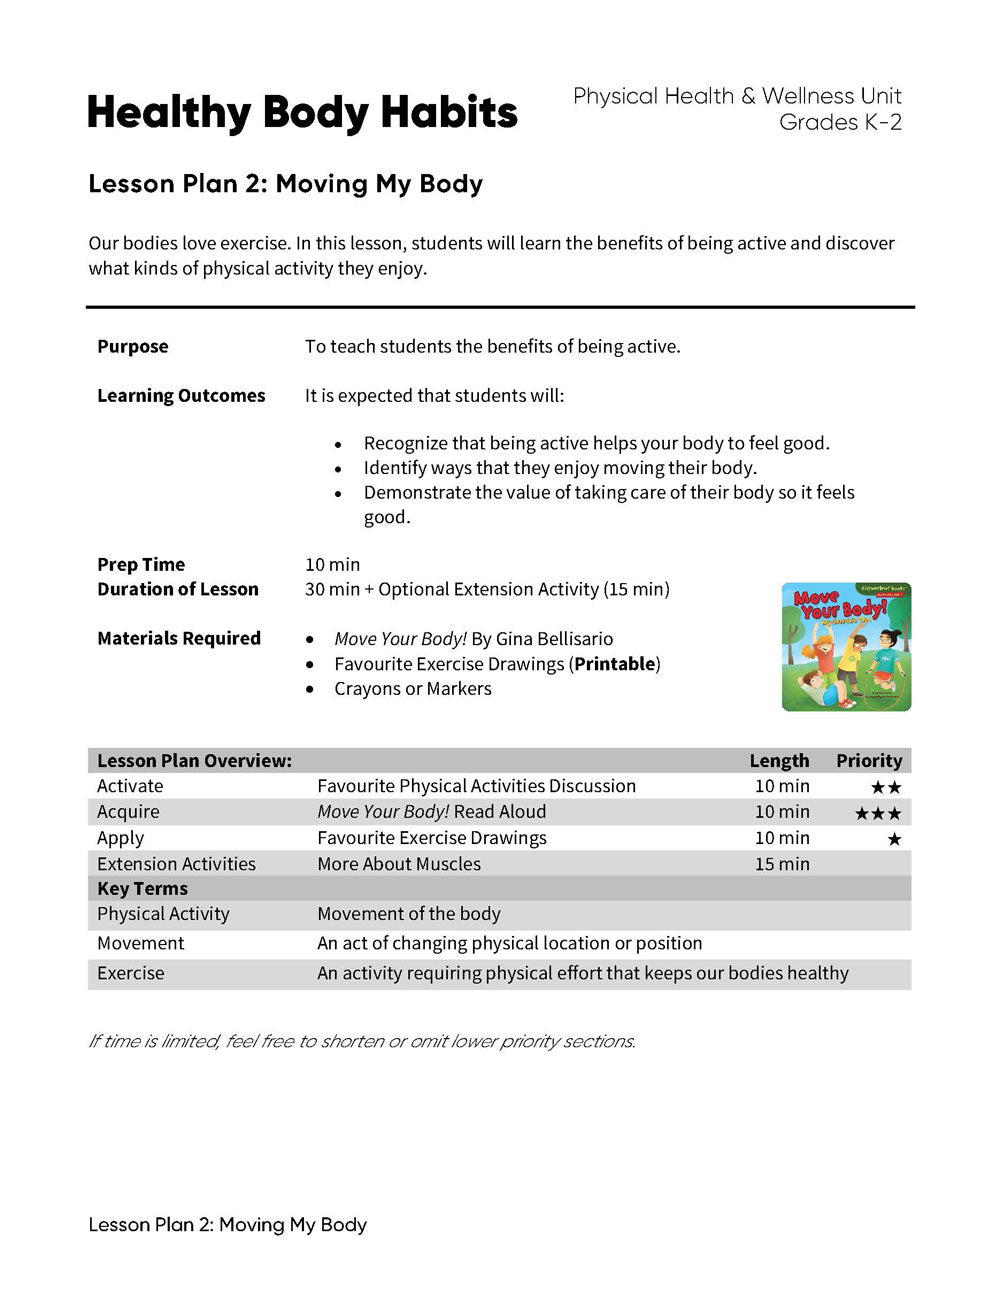 Lesson Plan 2: Moving My Body